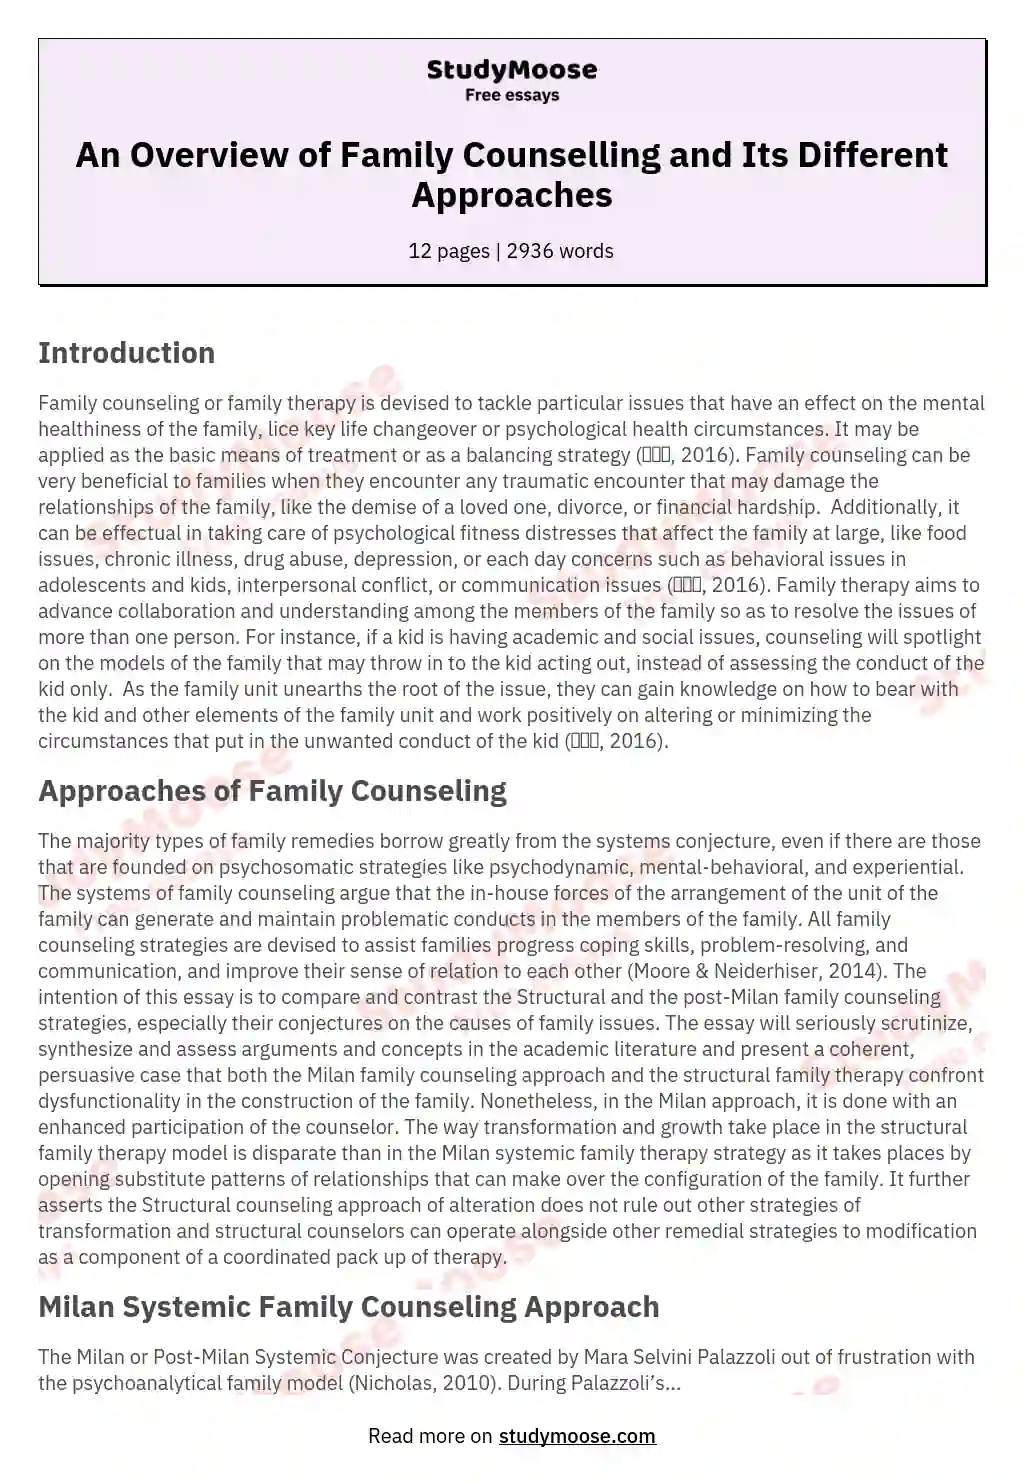 An Overview of Family Counselling and Its Different Approaches essay